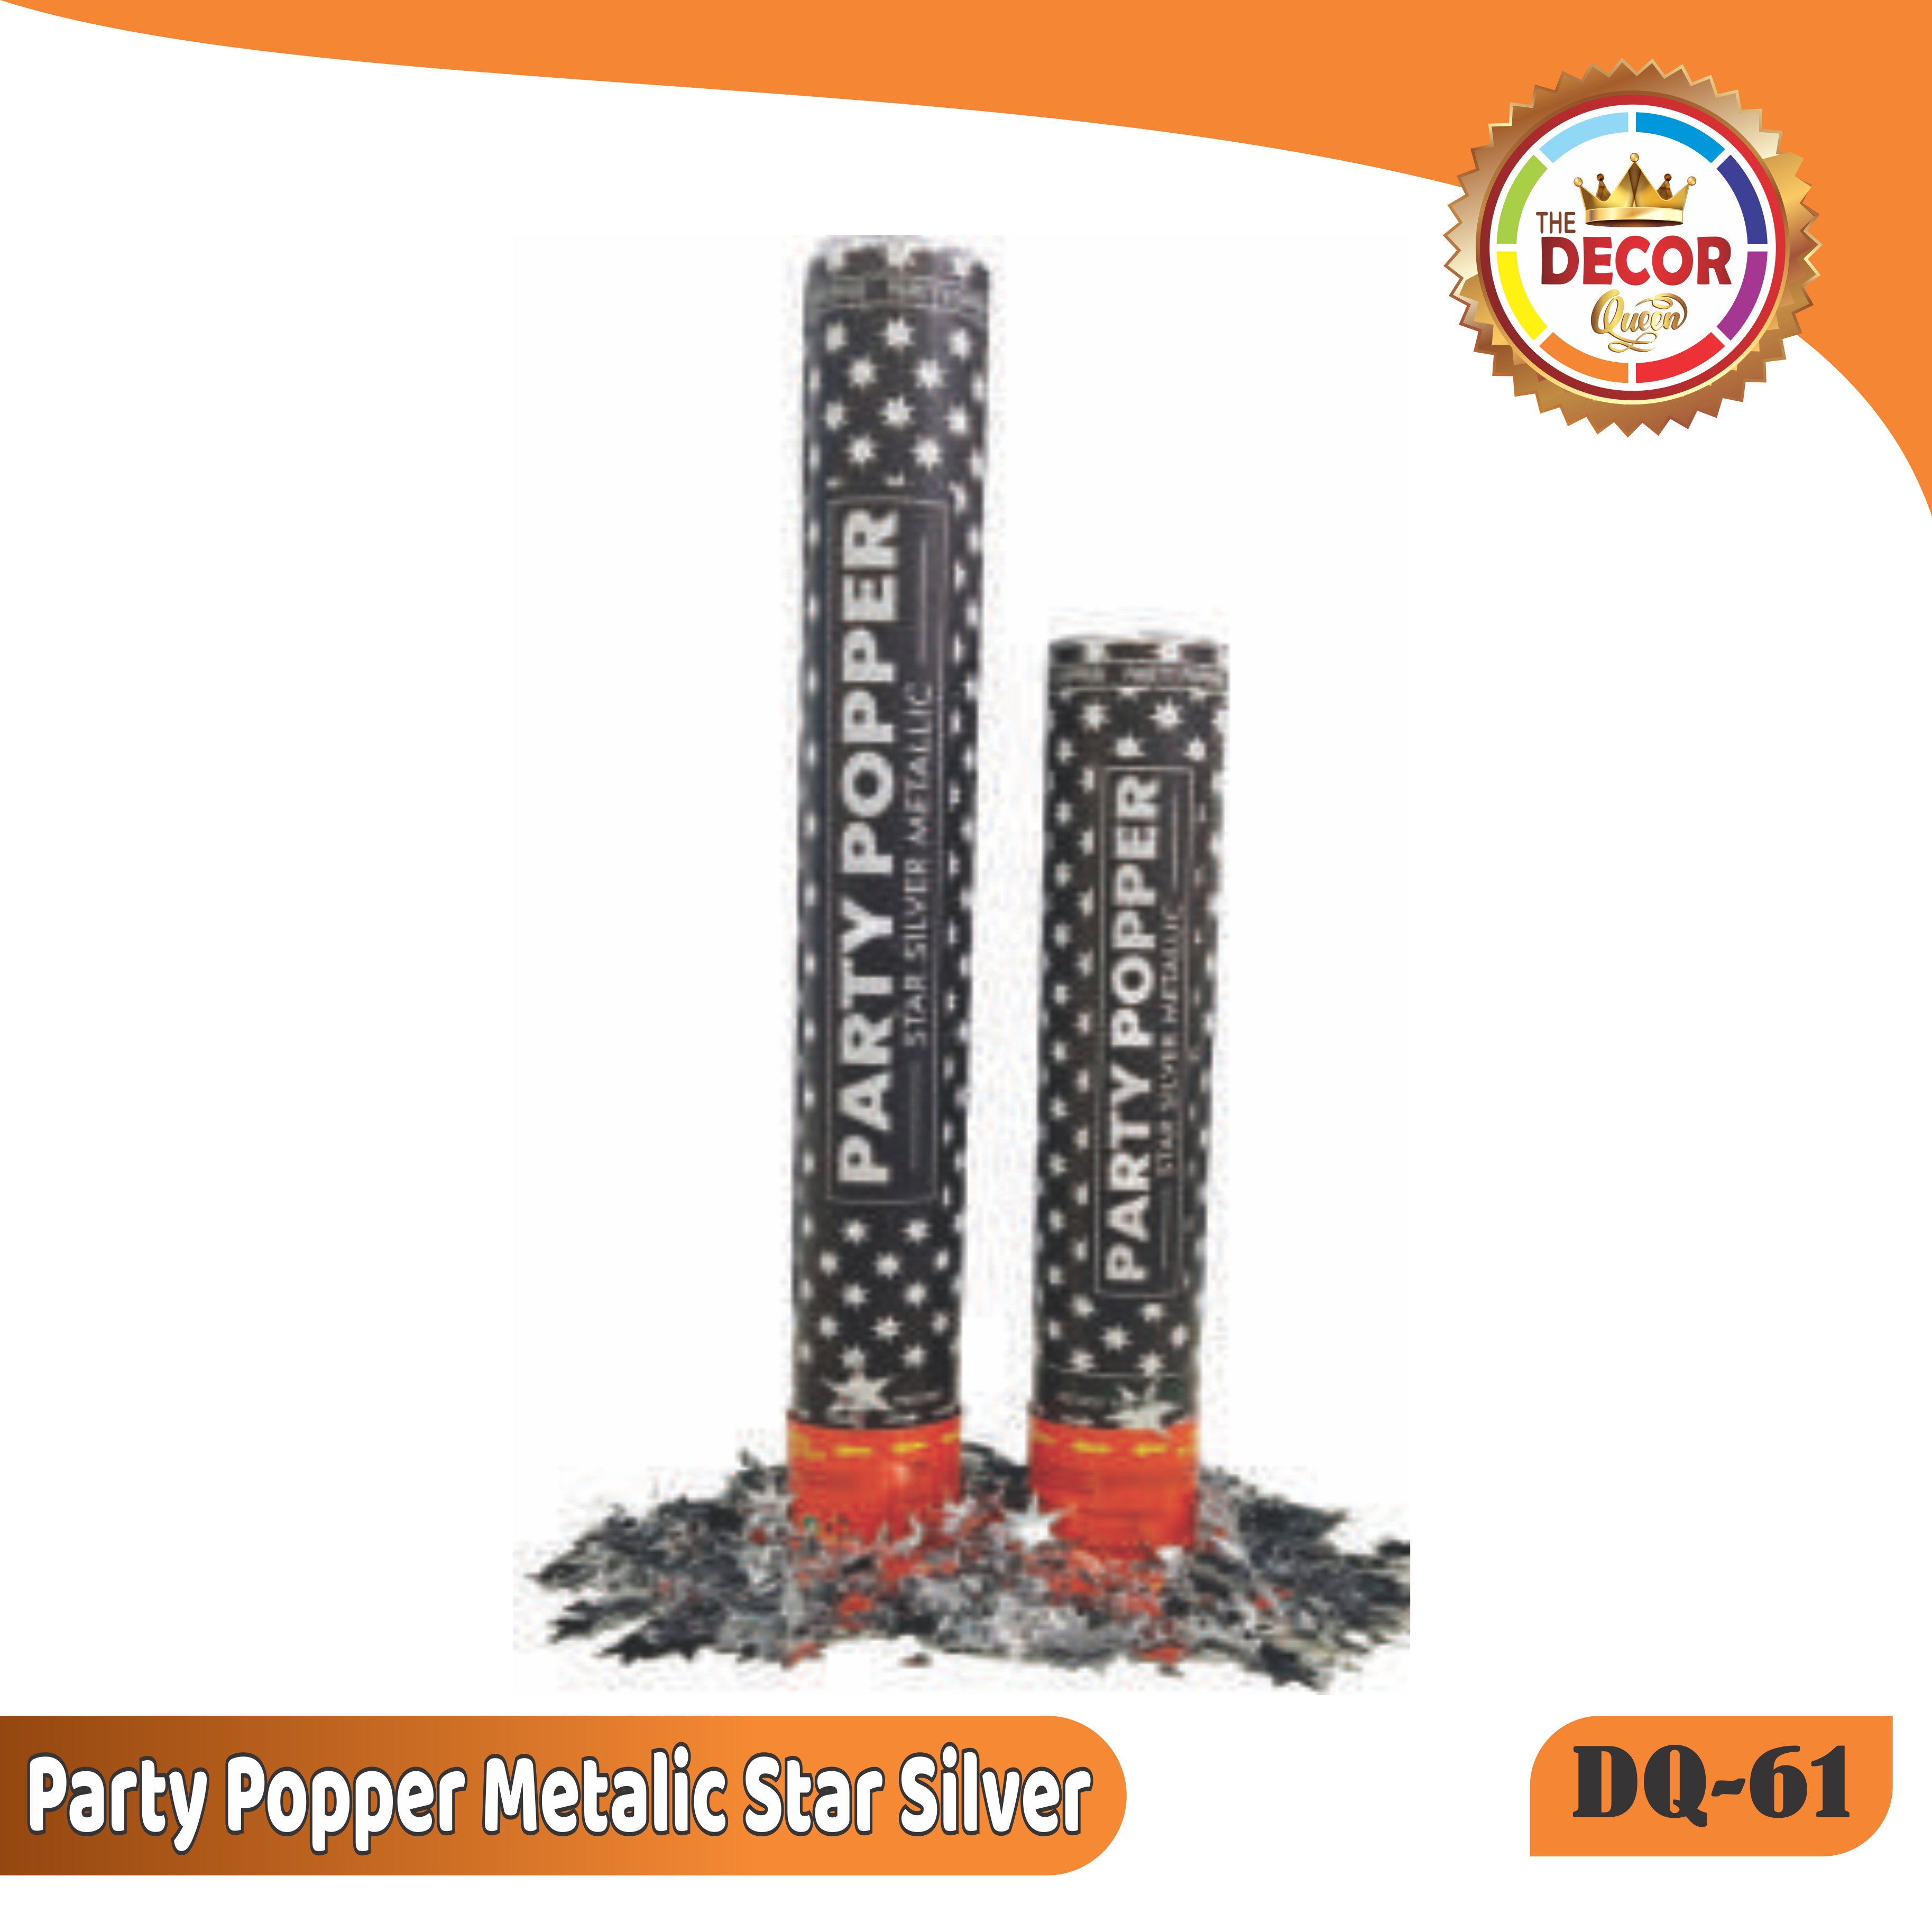 Metalic Star Silver Party Popper|Party Products|Party Poppers